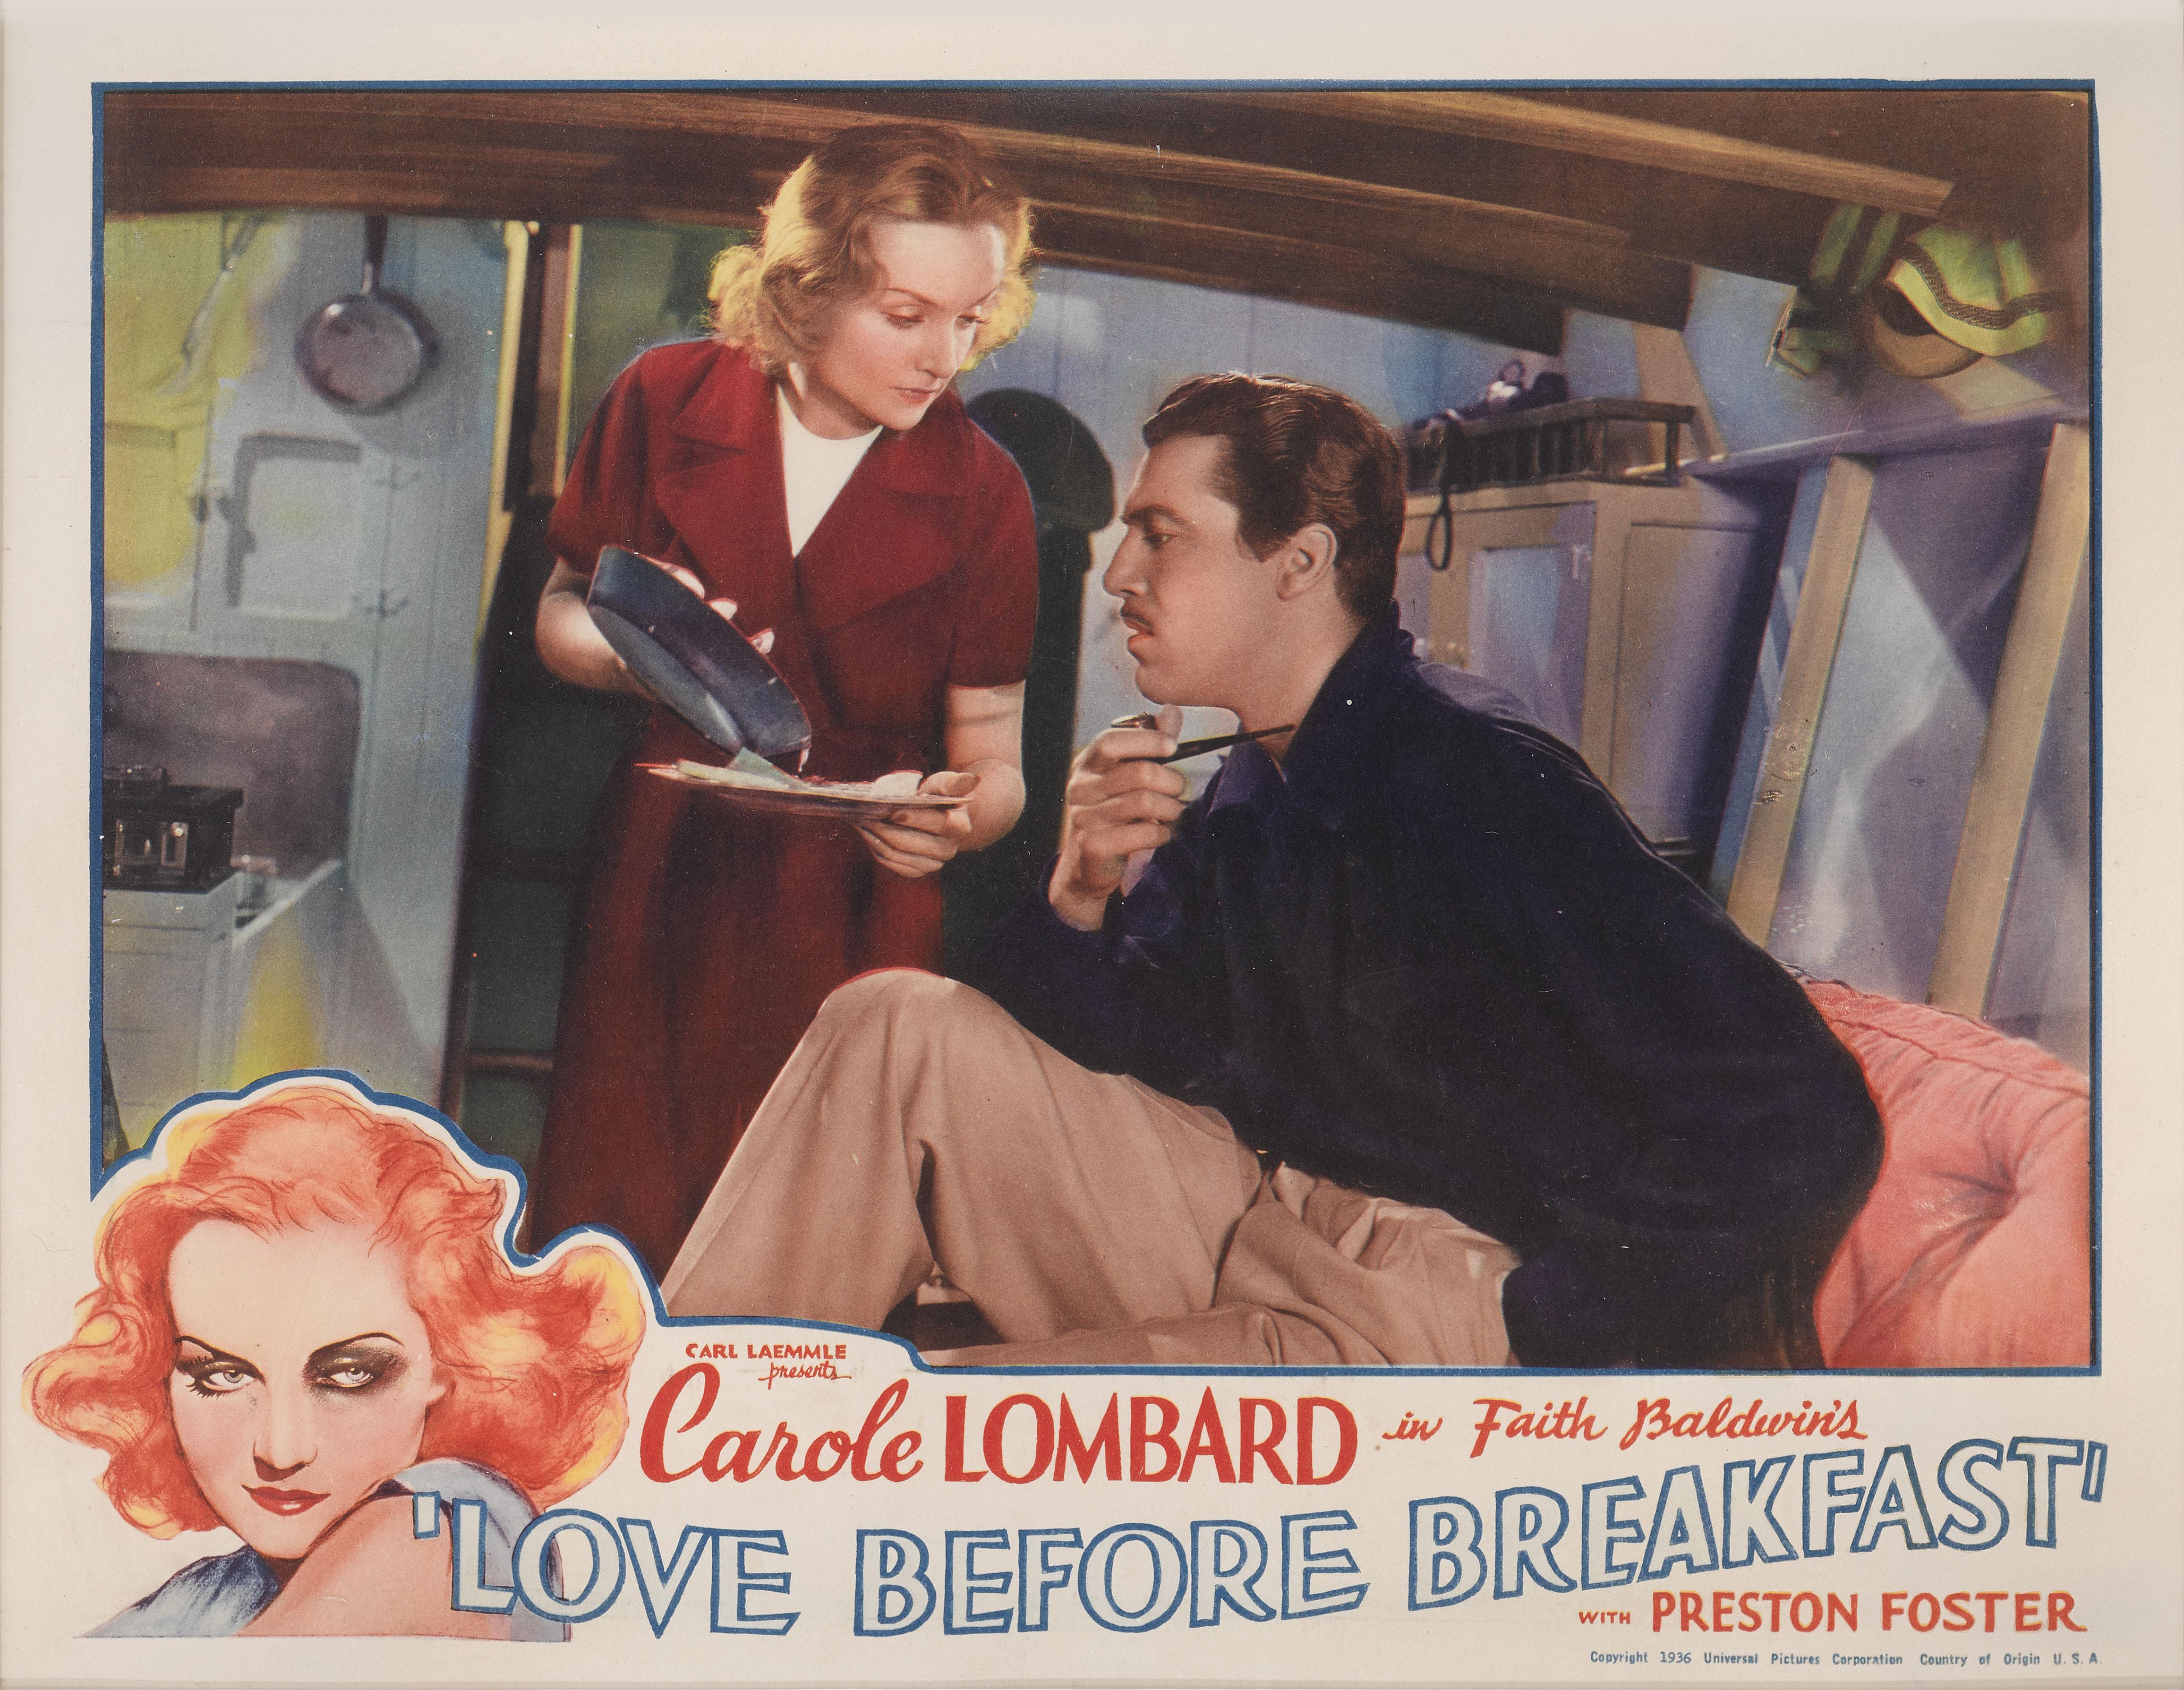 Original American lobby card for Love Before Breakfast 1936.
This comedy drama film starred Carole Lombard, Preston Foster and Cesar Romero. The film was directed by 
Walter Lang.
The piece is conservation framed with UV plexiglass in a Tulip wood